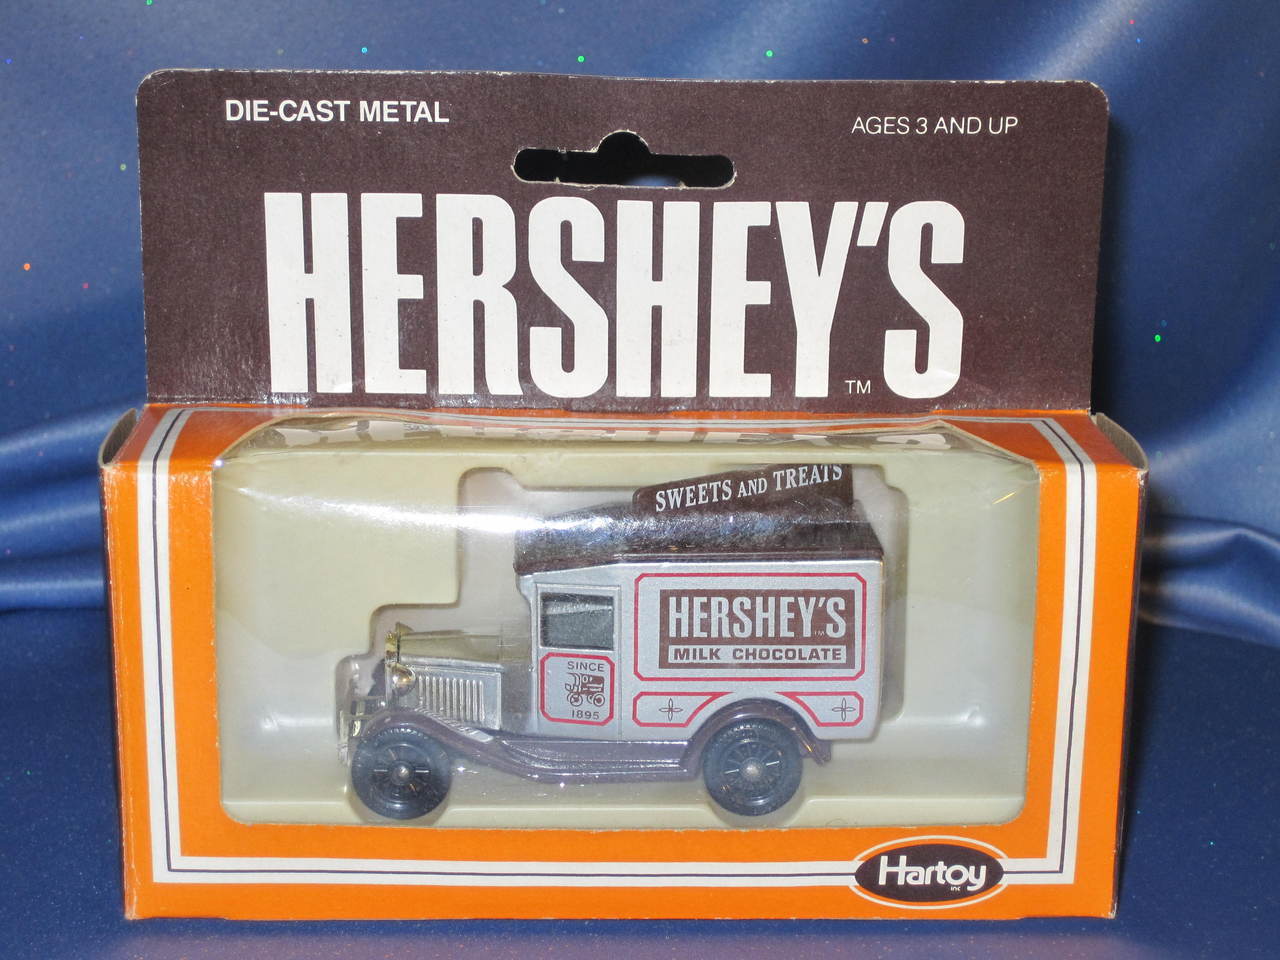 Hershey's Milk Chocolate Sweets and Treats Delivery Truck by Lledo. - $17.00